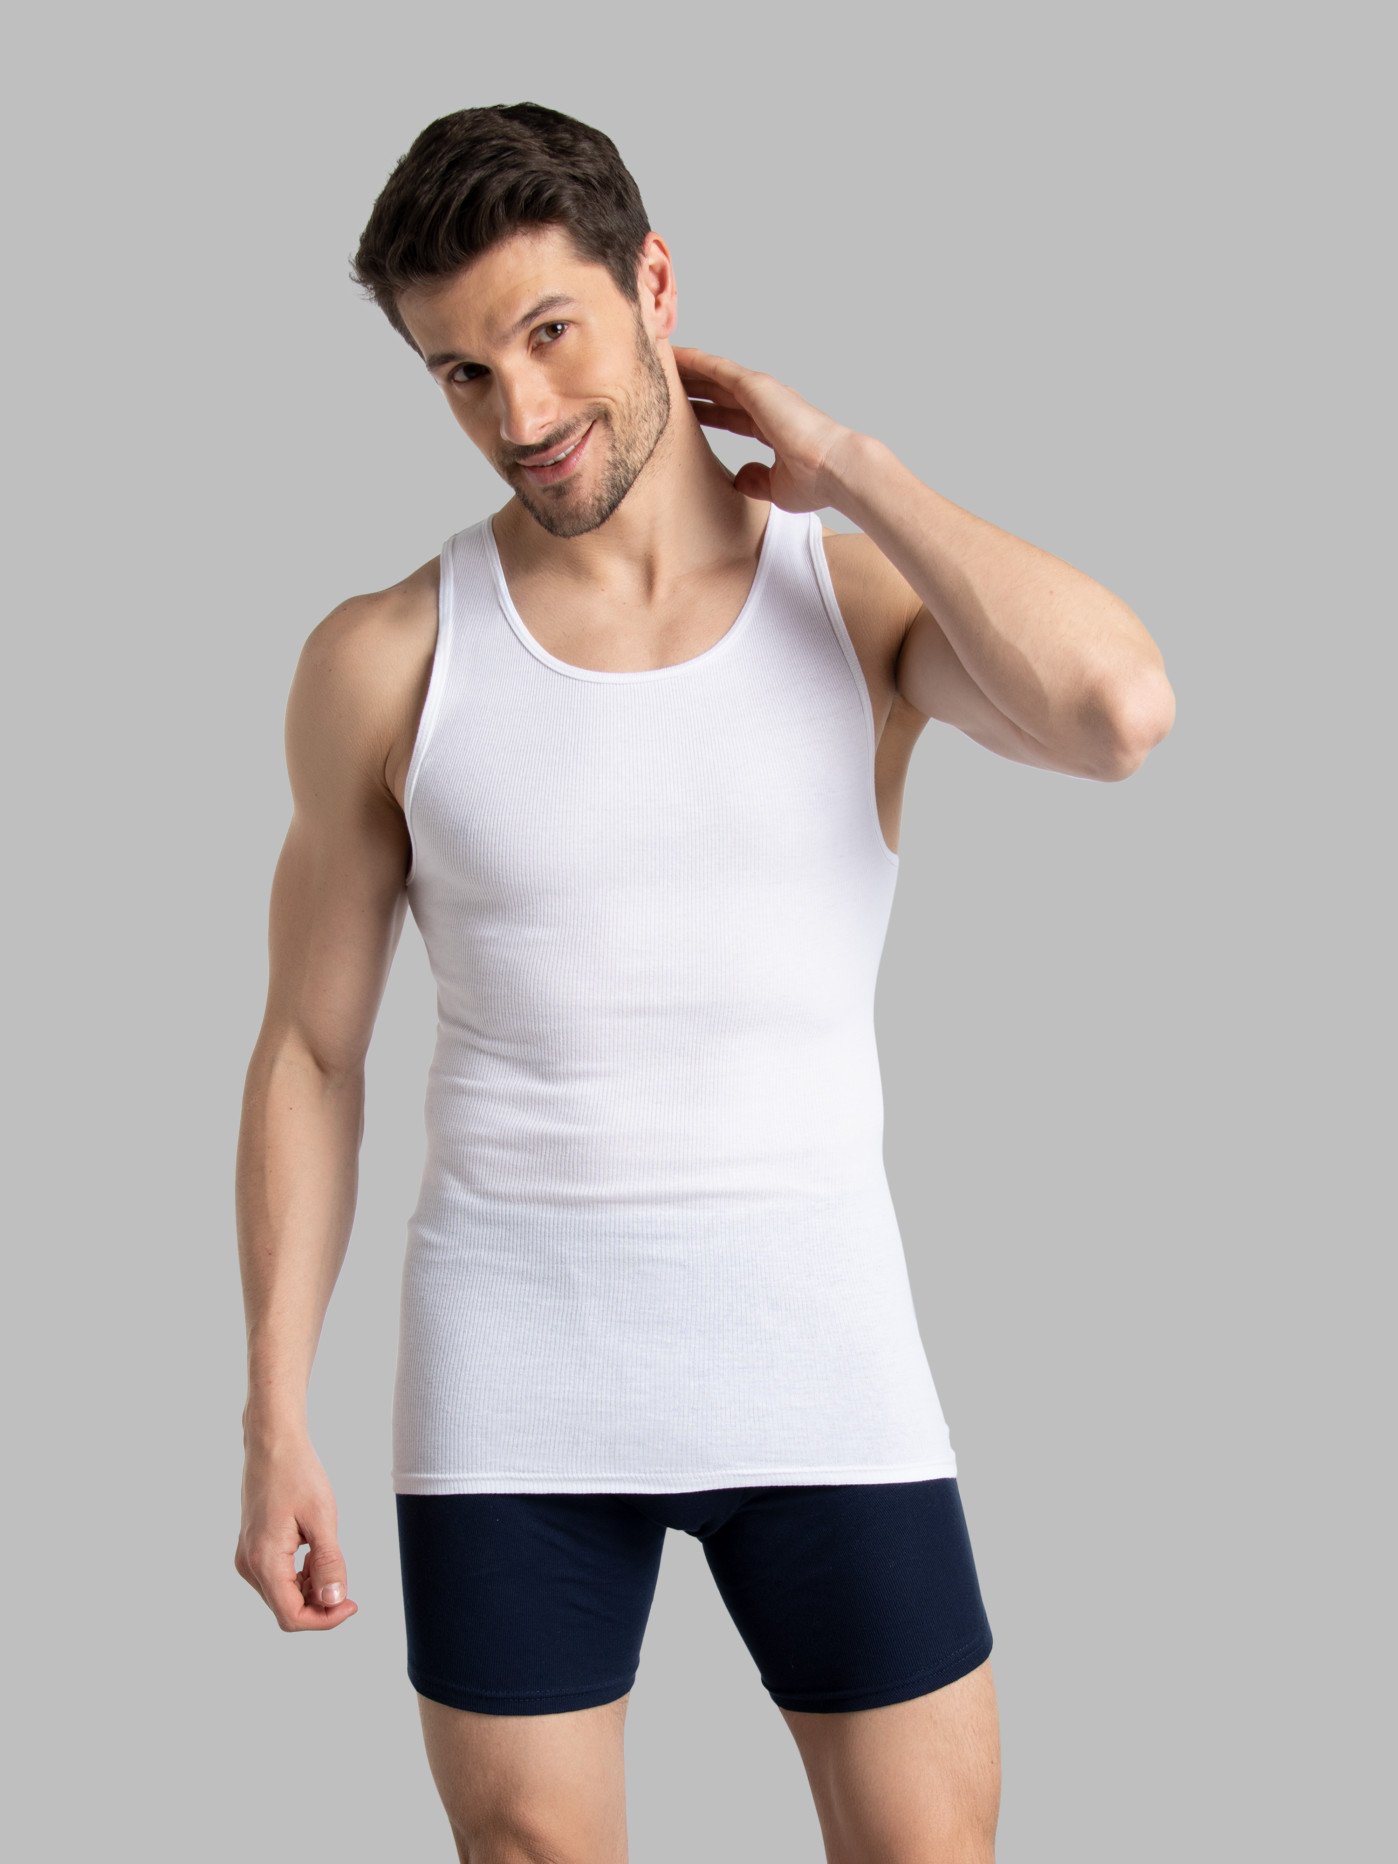 Go-Dry Cool Odor-Control Performance Tank Top for Men